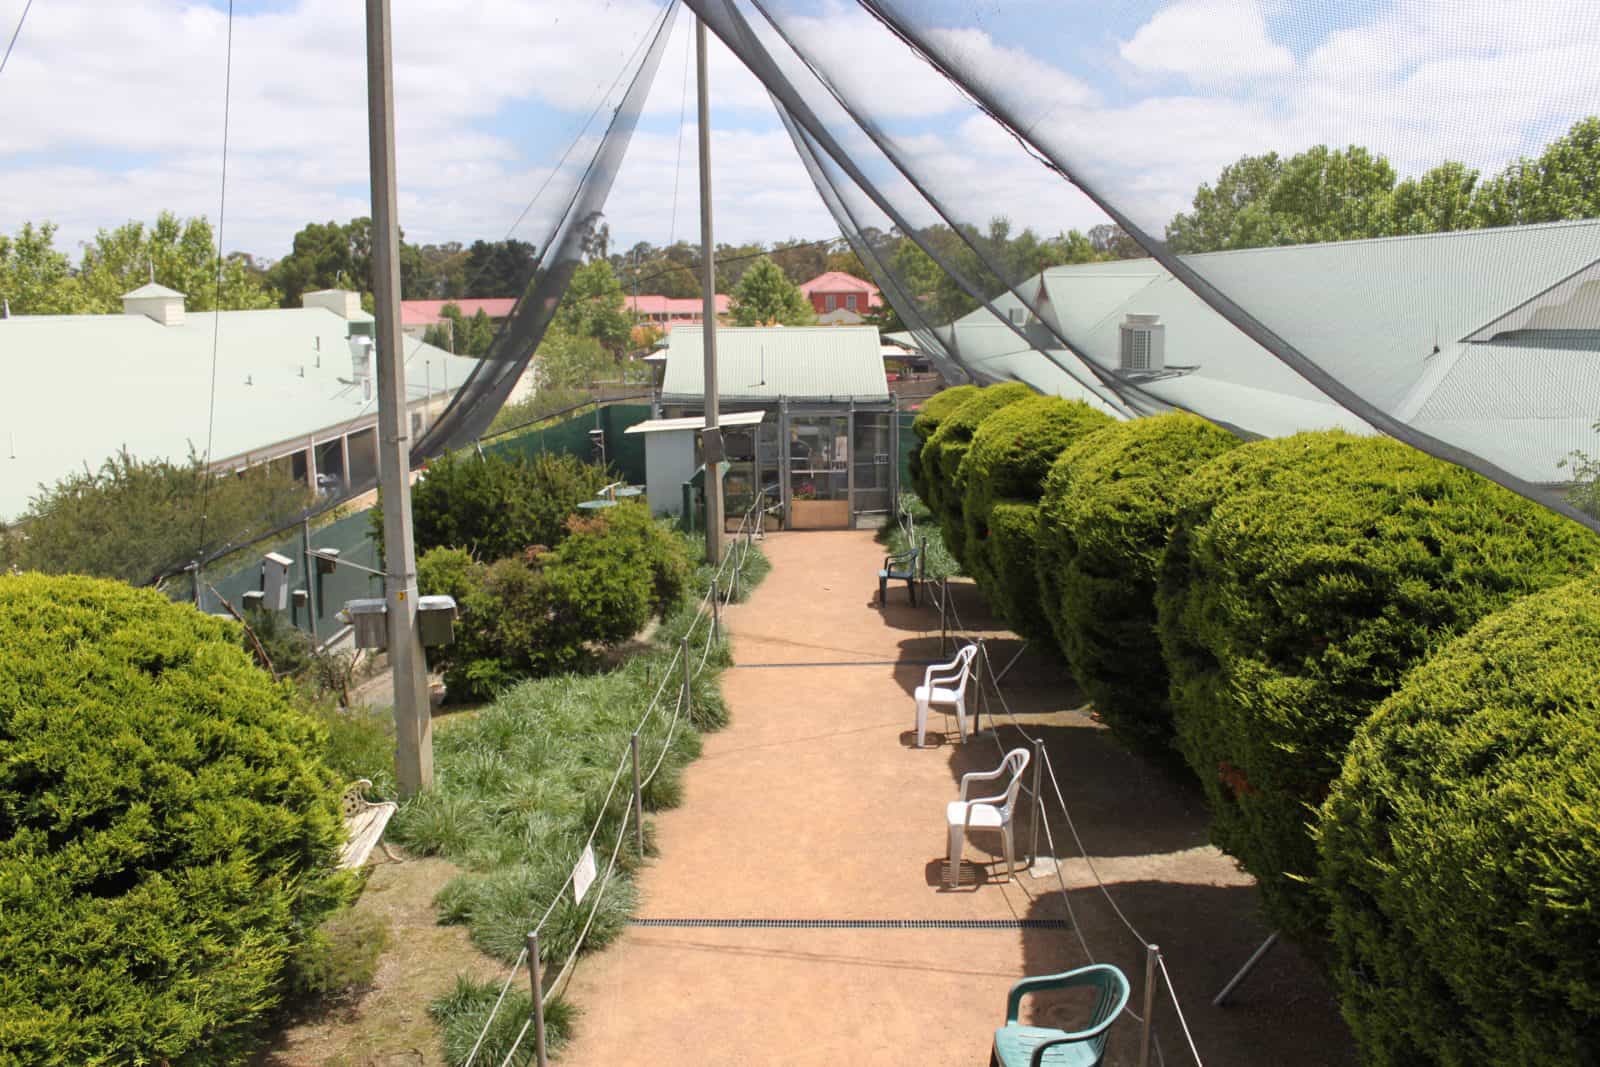 View inside the Canberra Walk in Aviary